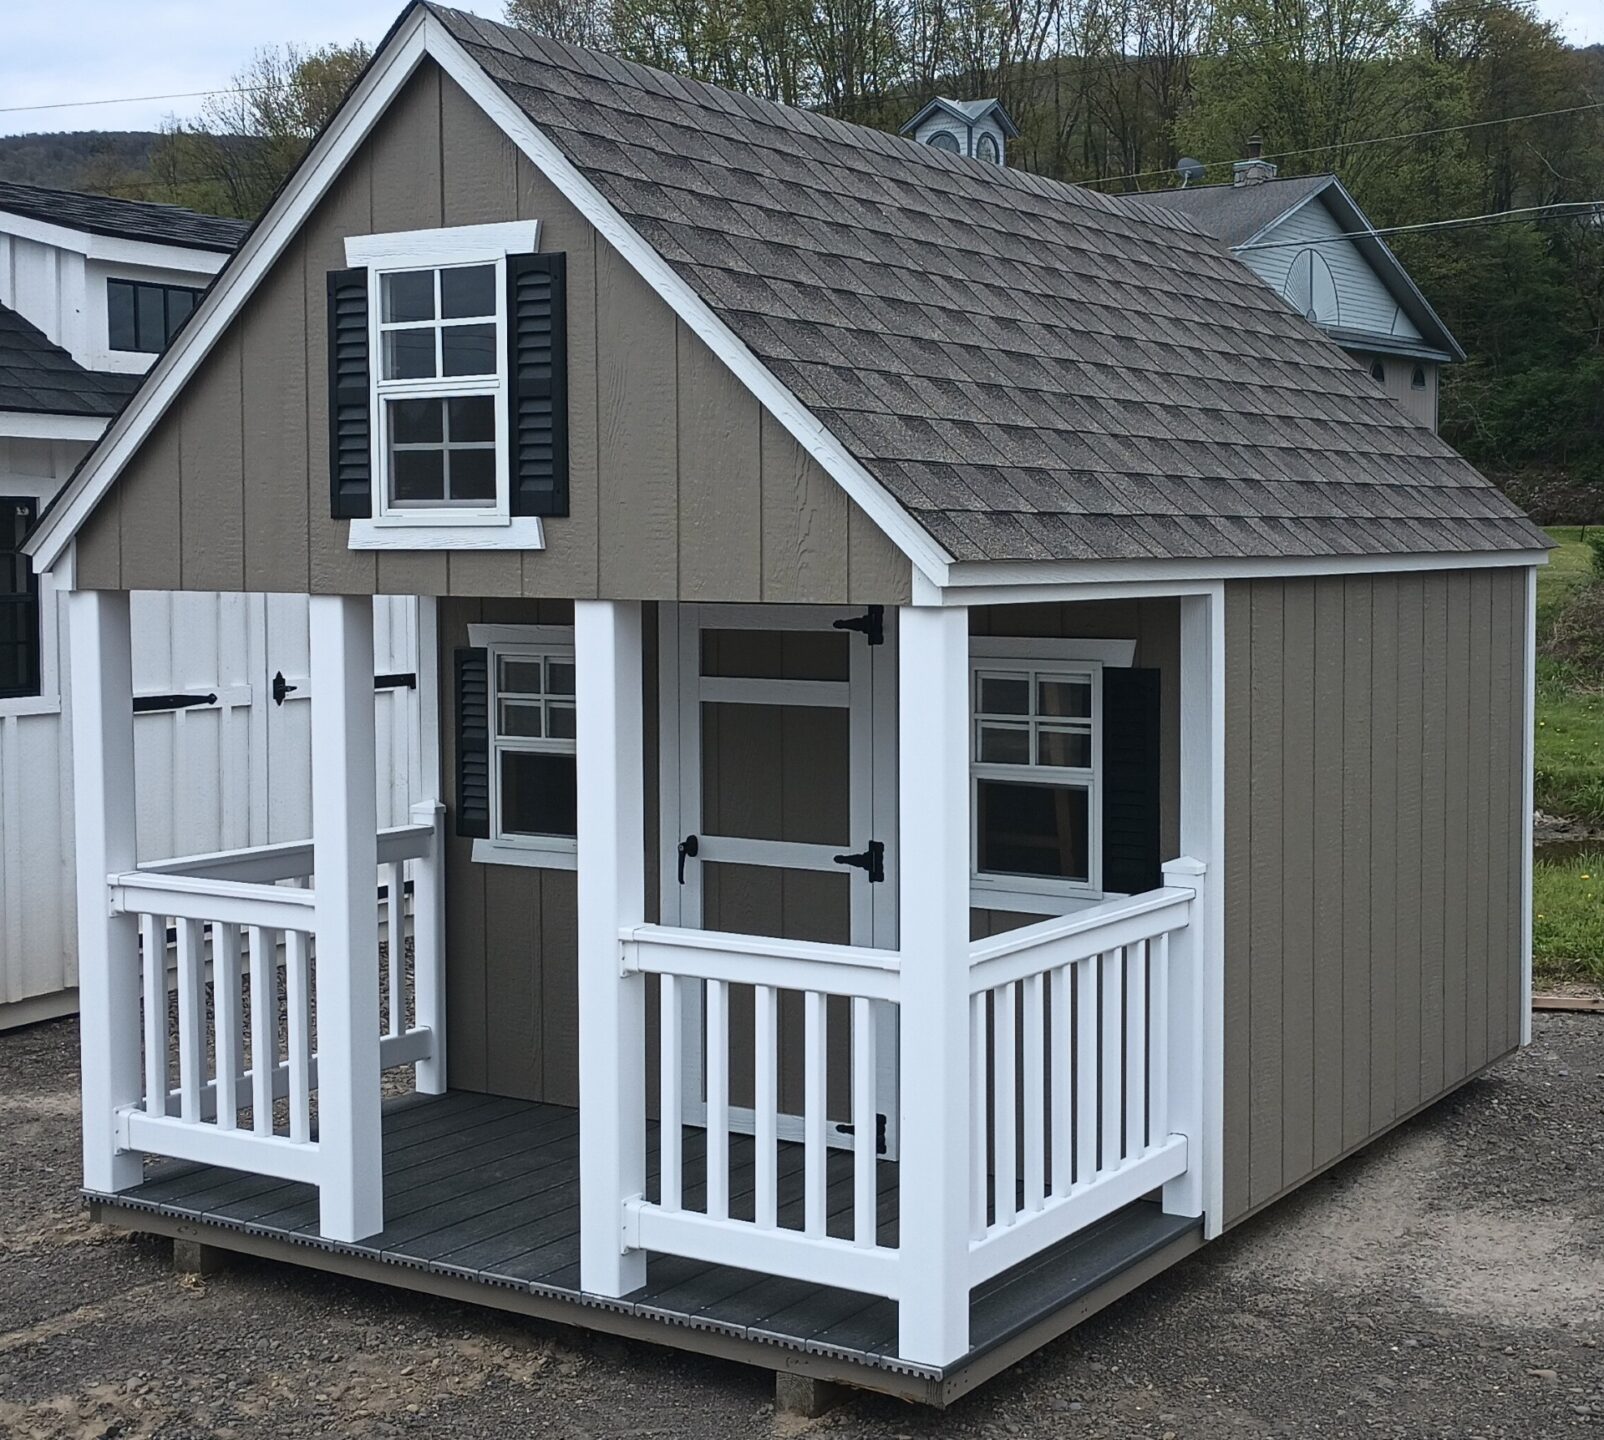 Clay and white playhouse with white vinyl porch, single door and windows